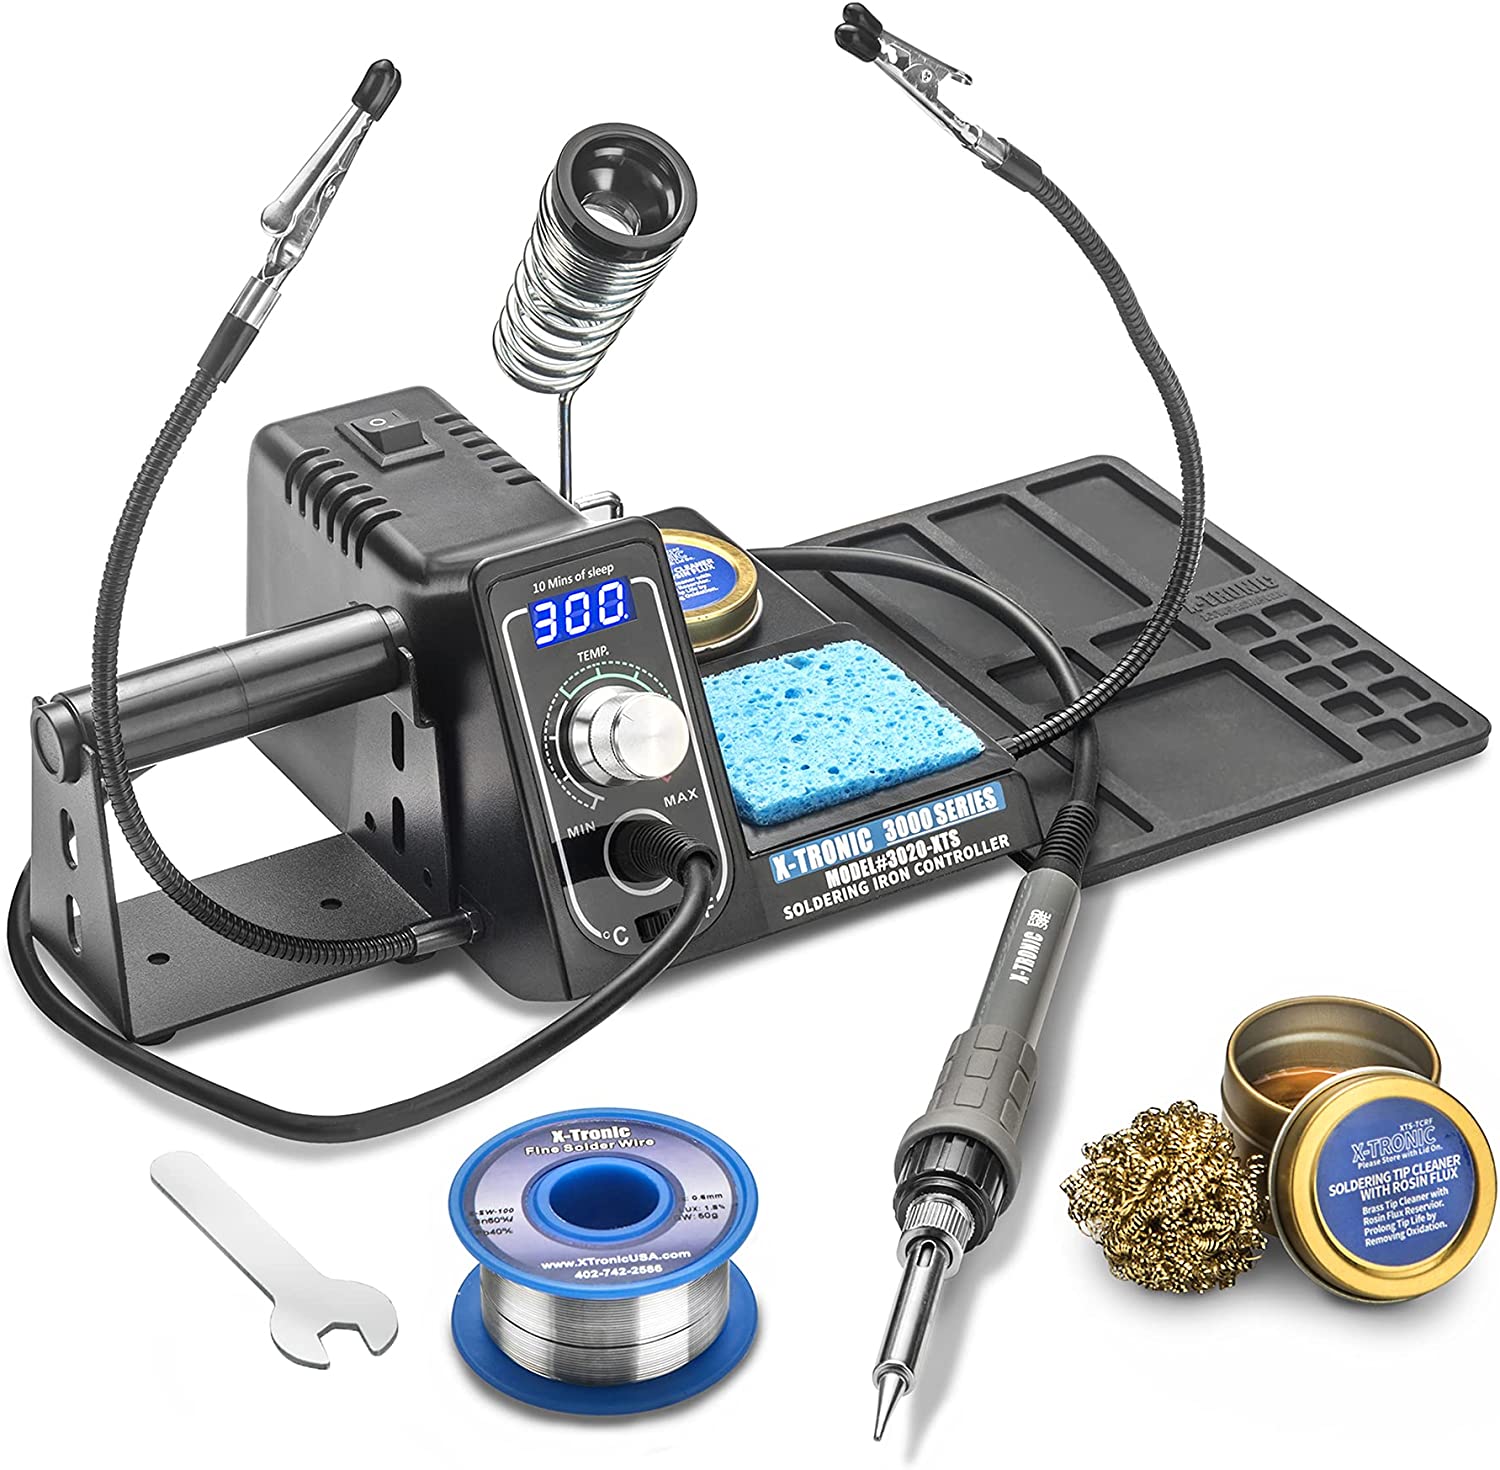 X-TRONIC 3020-XTS Silicone Mat Station & Soldering Iron